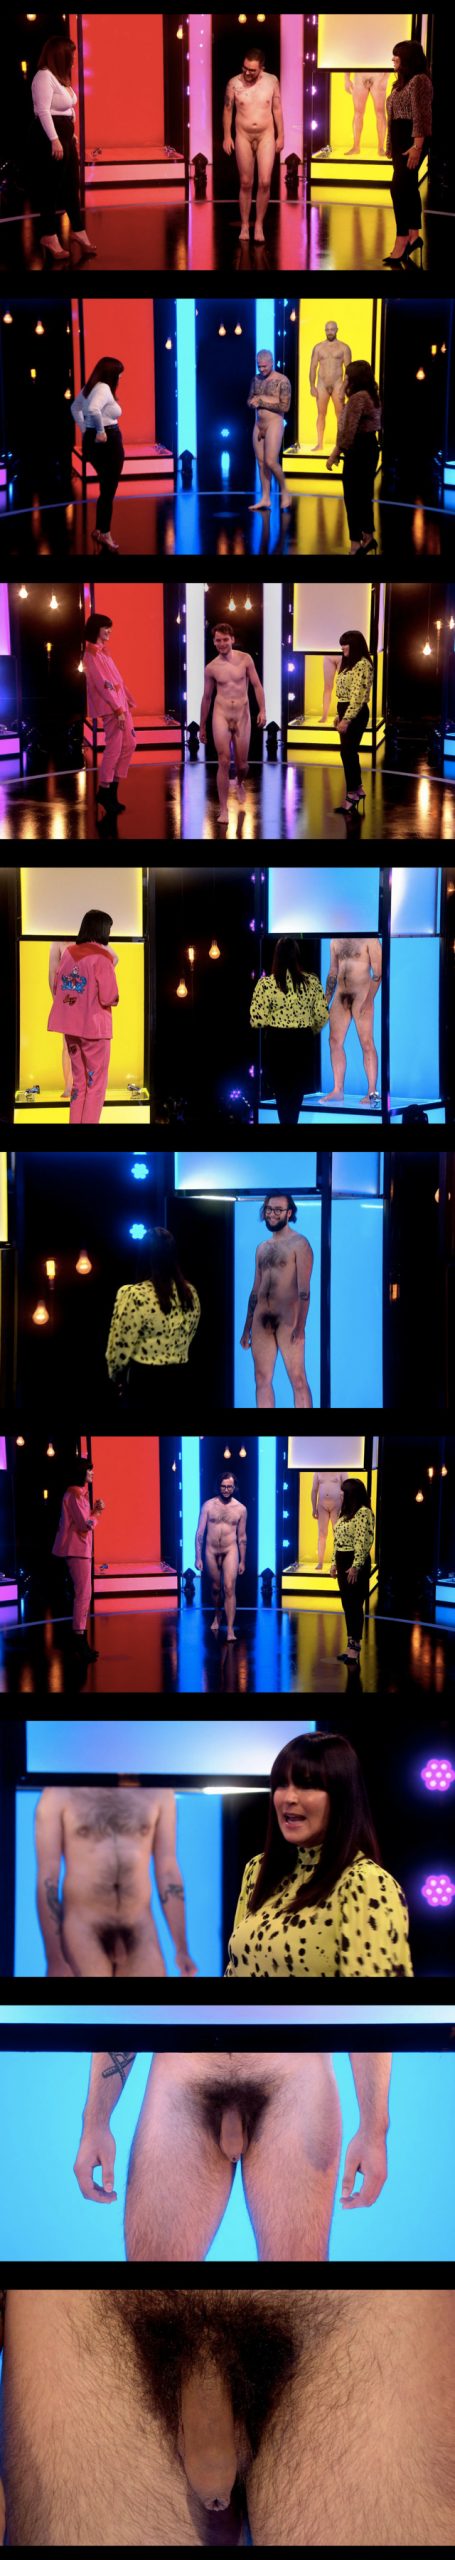 naked guys on tv naked attraction